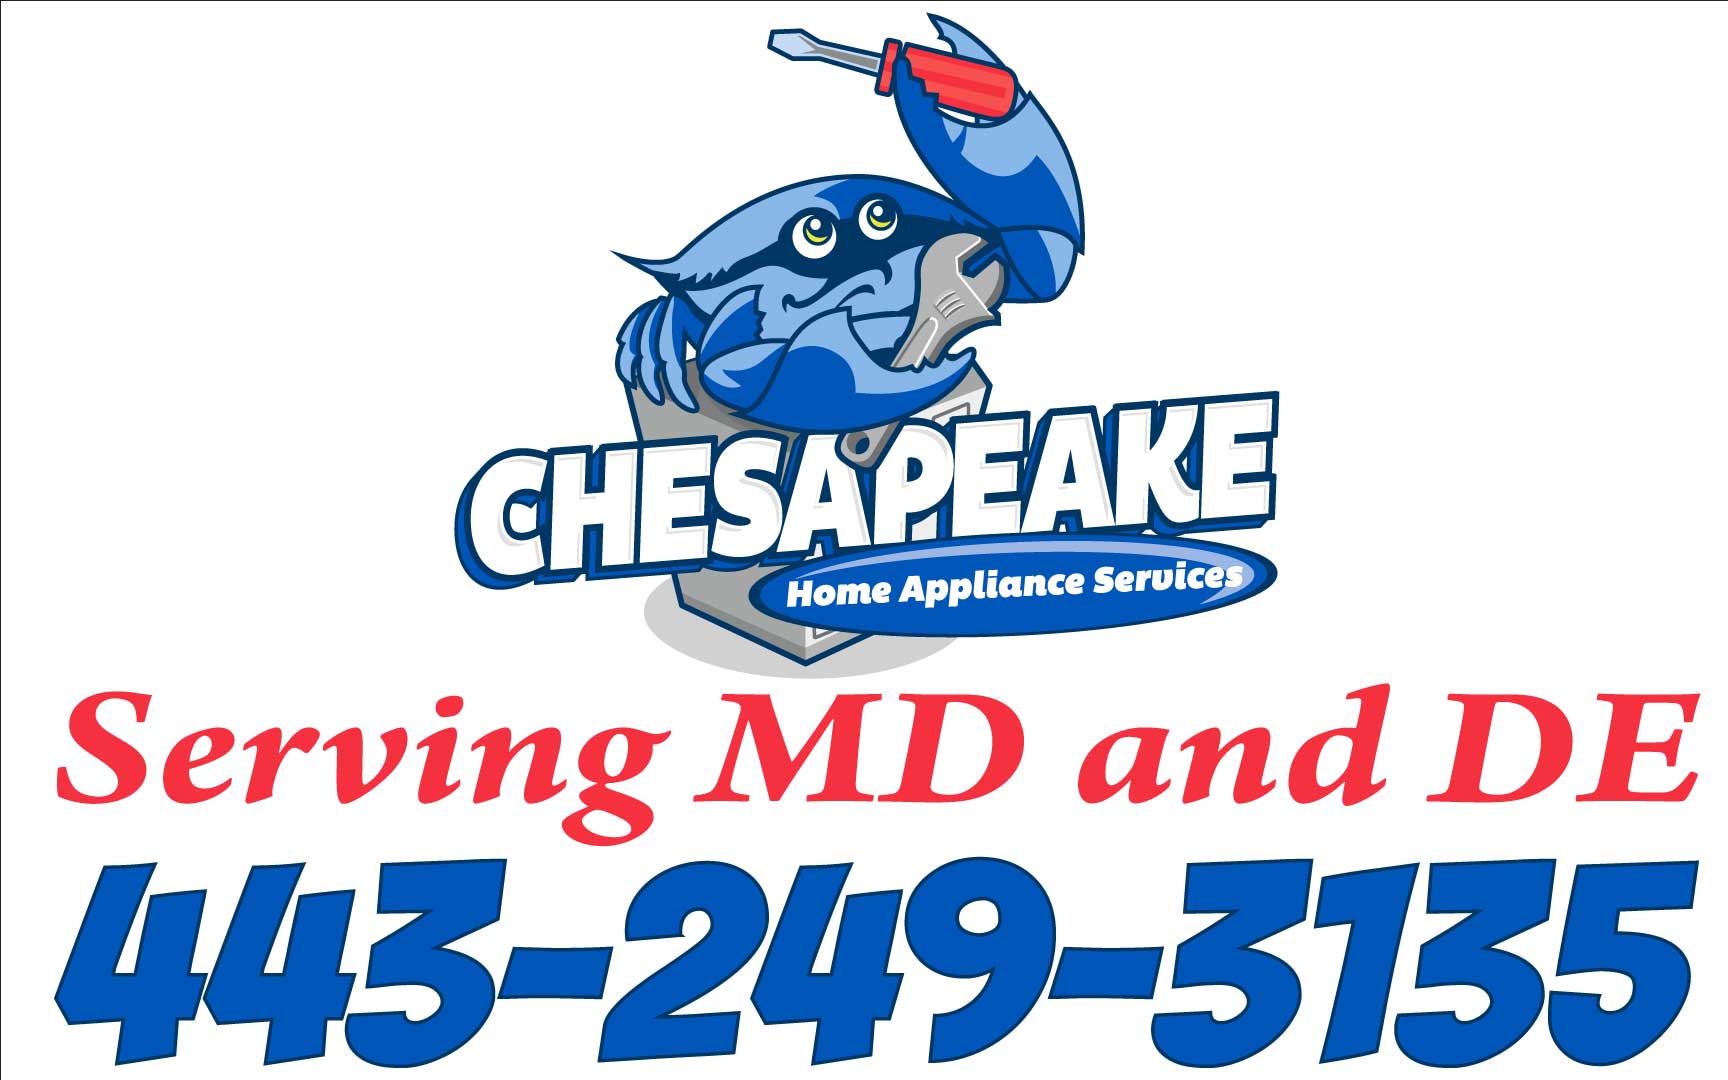 Chesapeake Home Appliance Services 117 Pine Tree Rd, Chestertown Maryland 21620